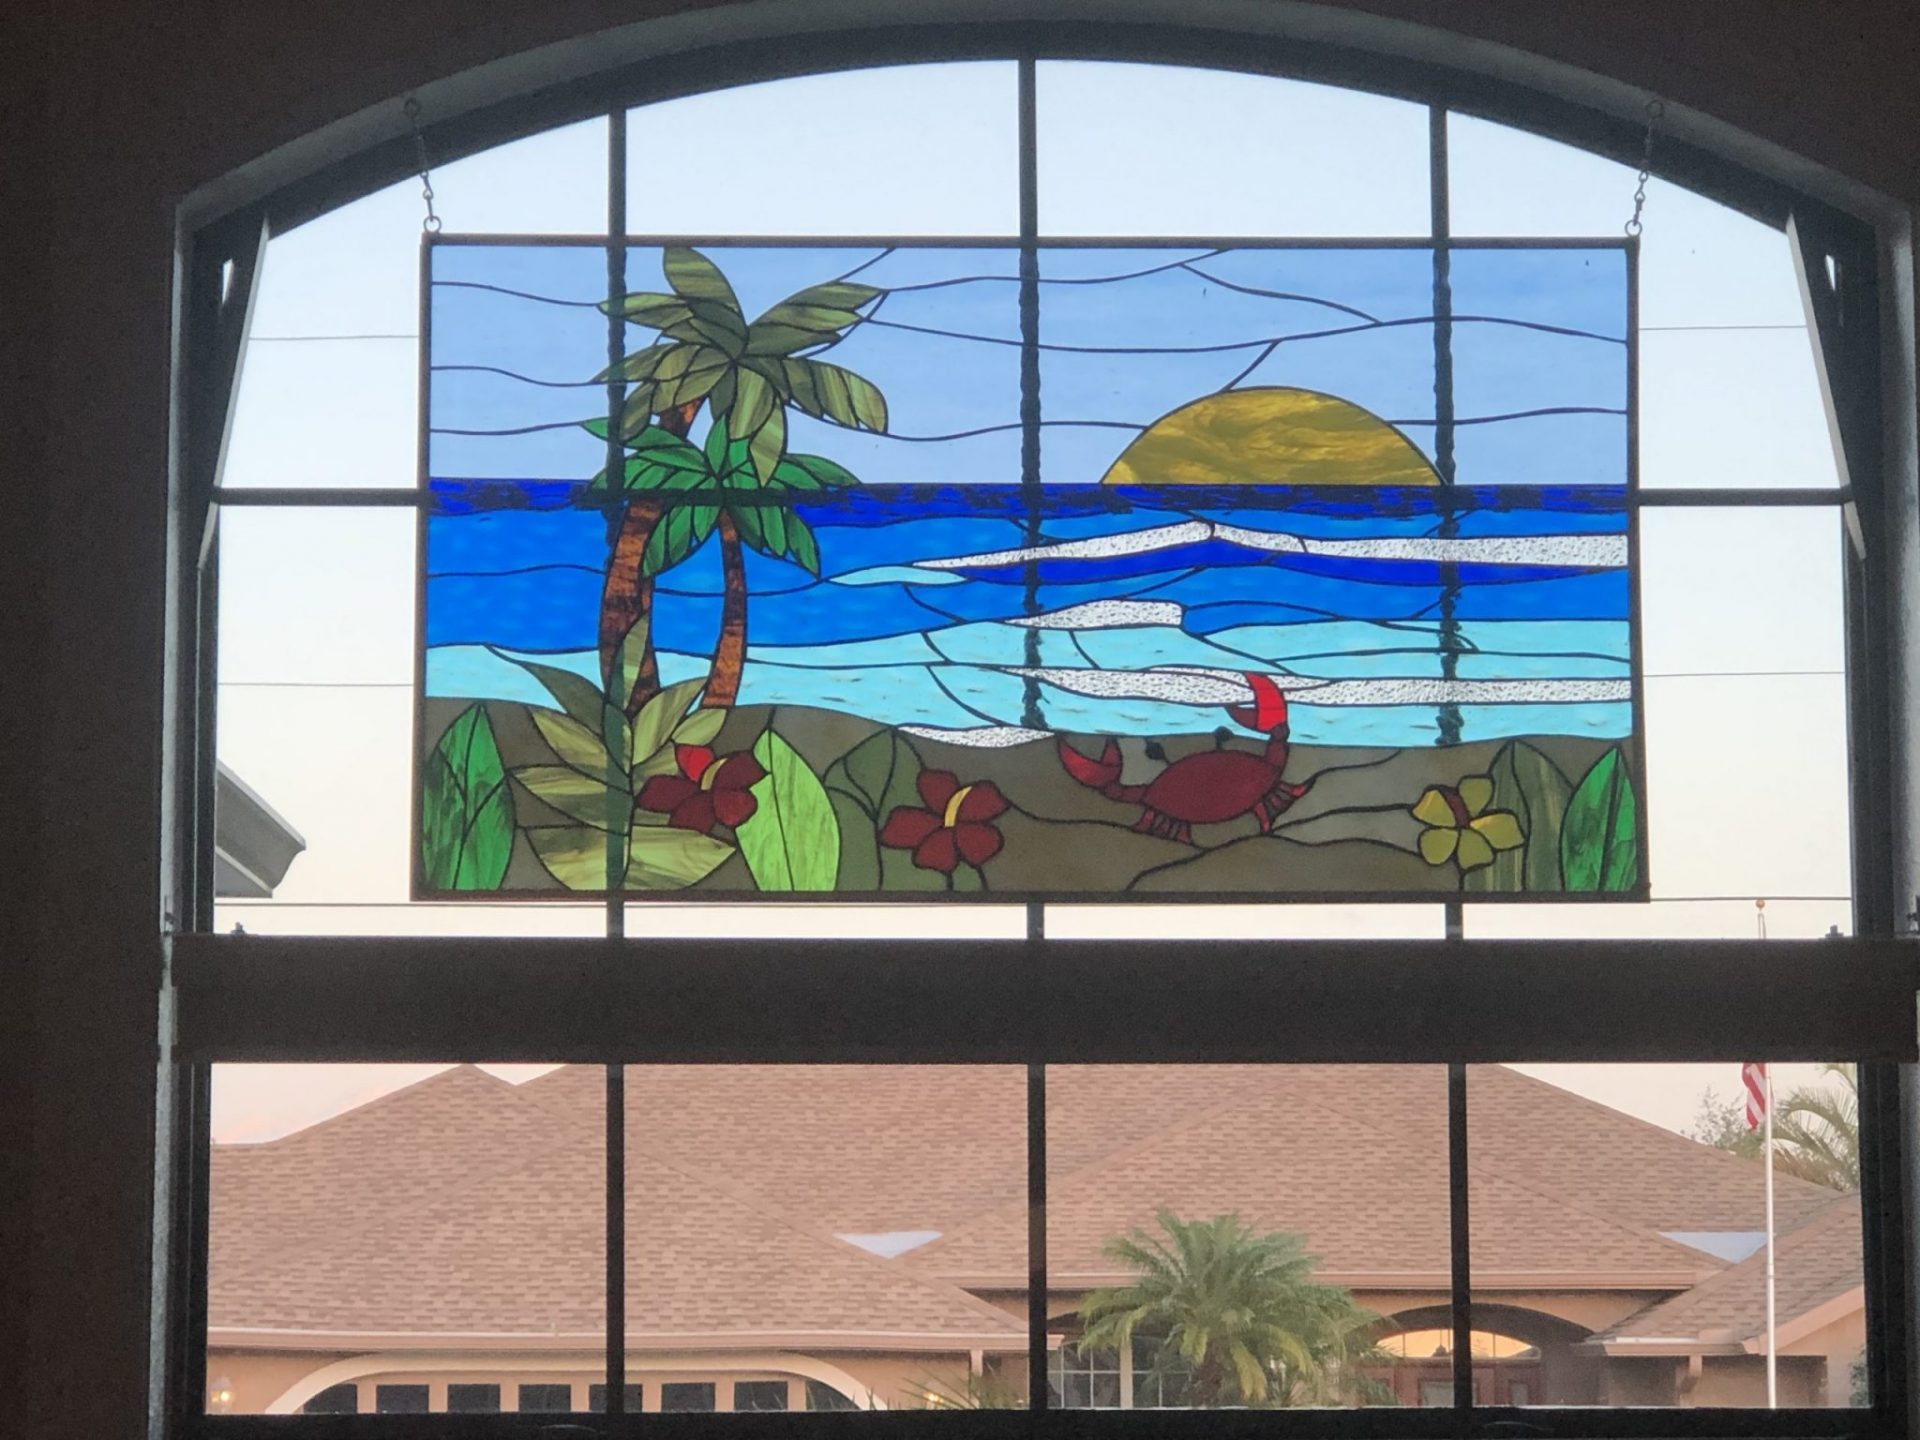 Crab, Palm Tree, Flowers & Sunset Leaded Stained Glass Window Panel installed